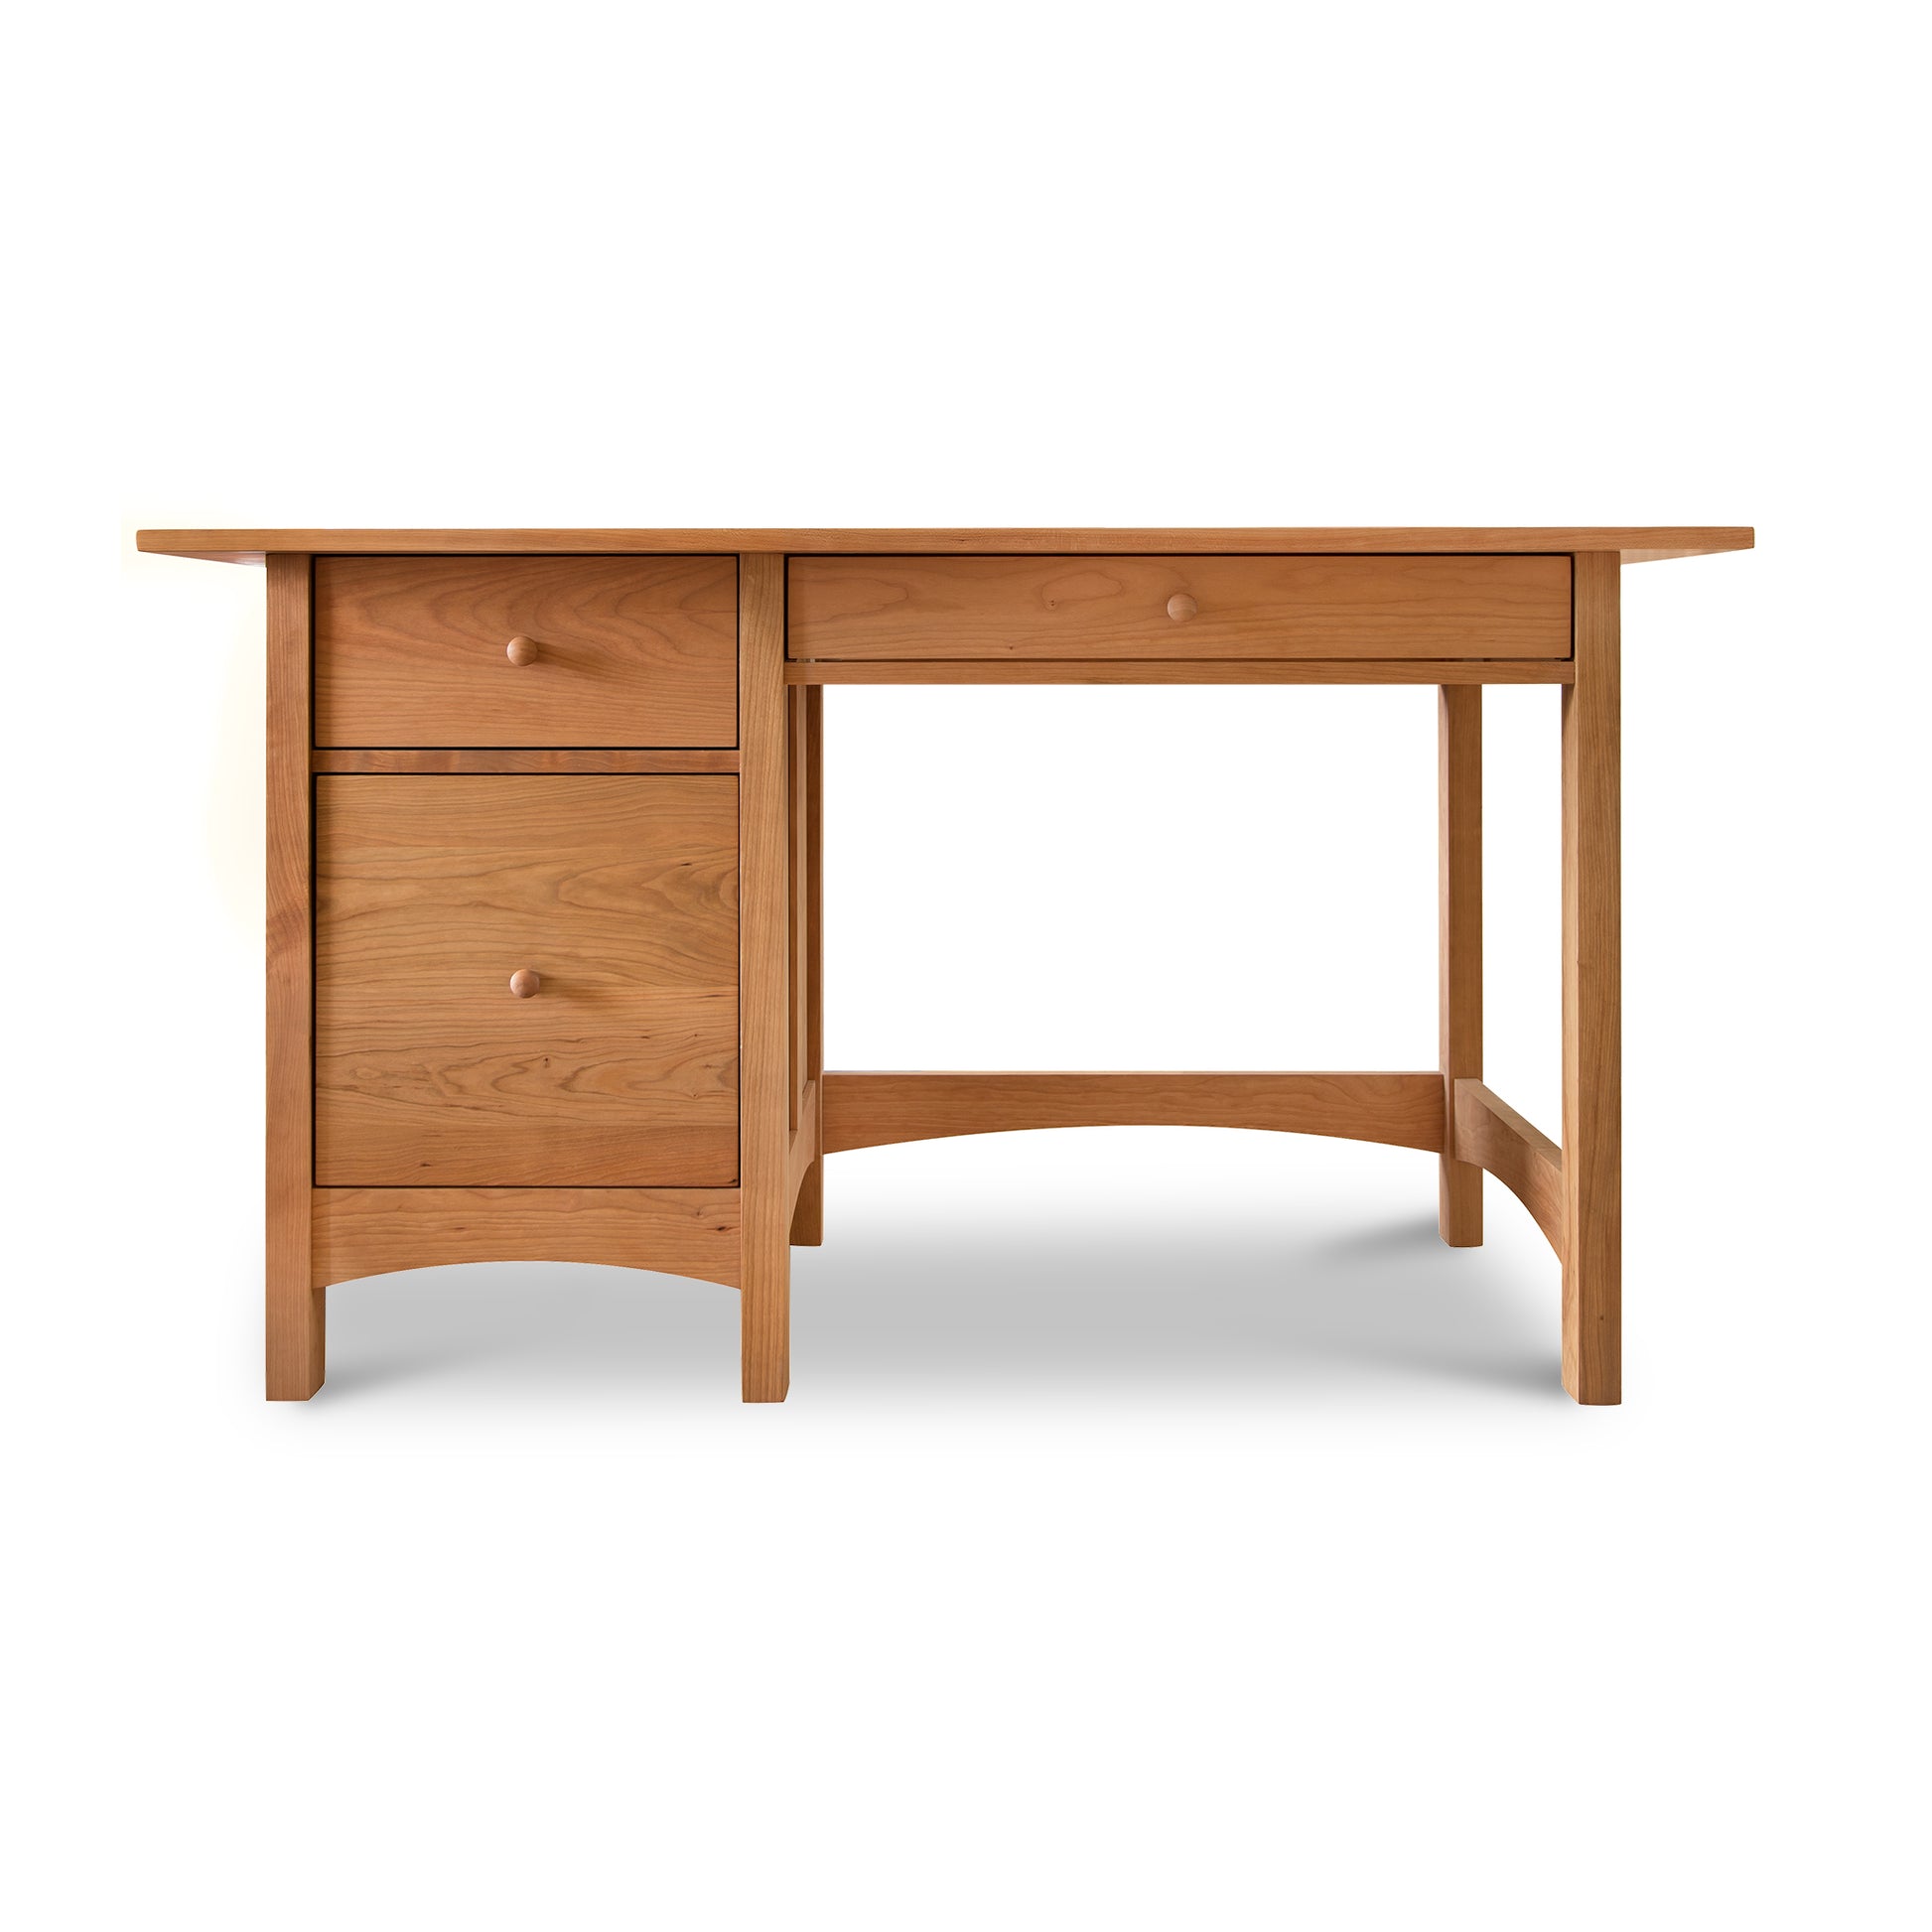 Vermont Furniture Designs Burlington Shaker Study Desk with three drawers on one side, isolated on a white background.